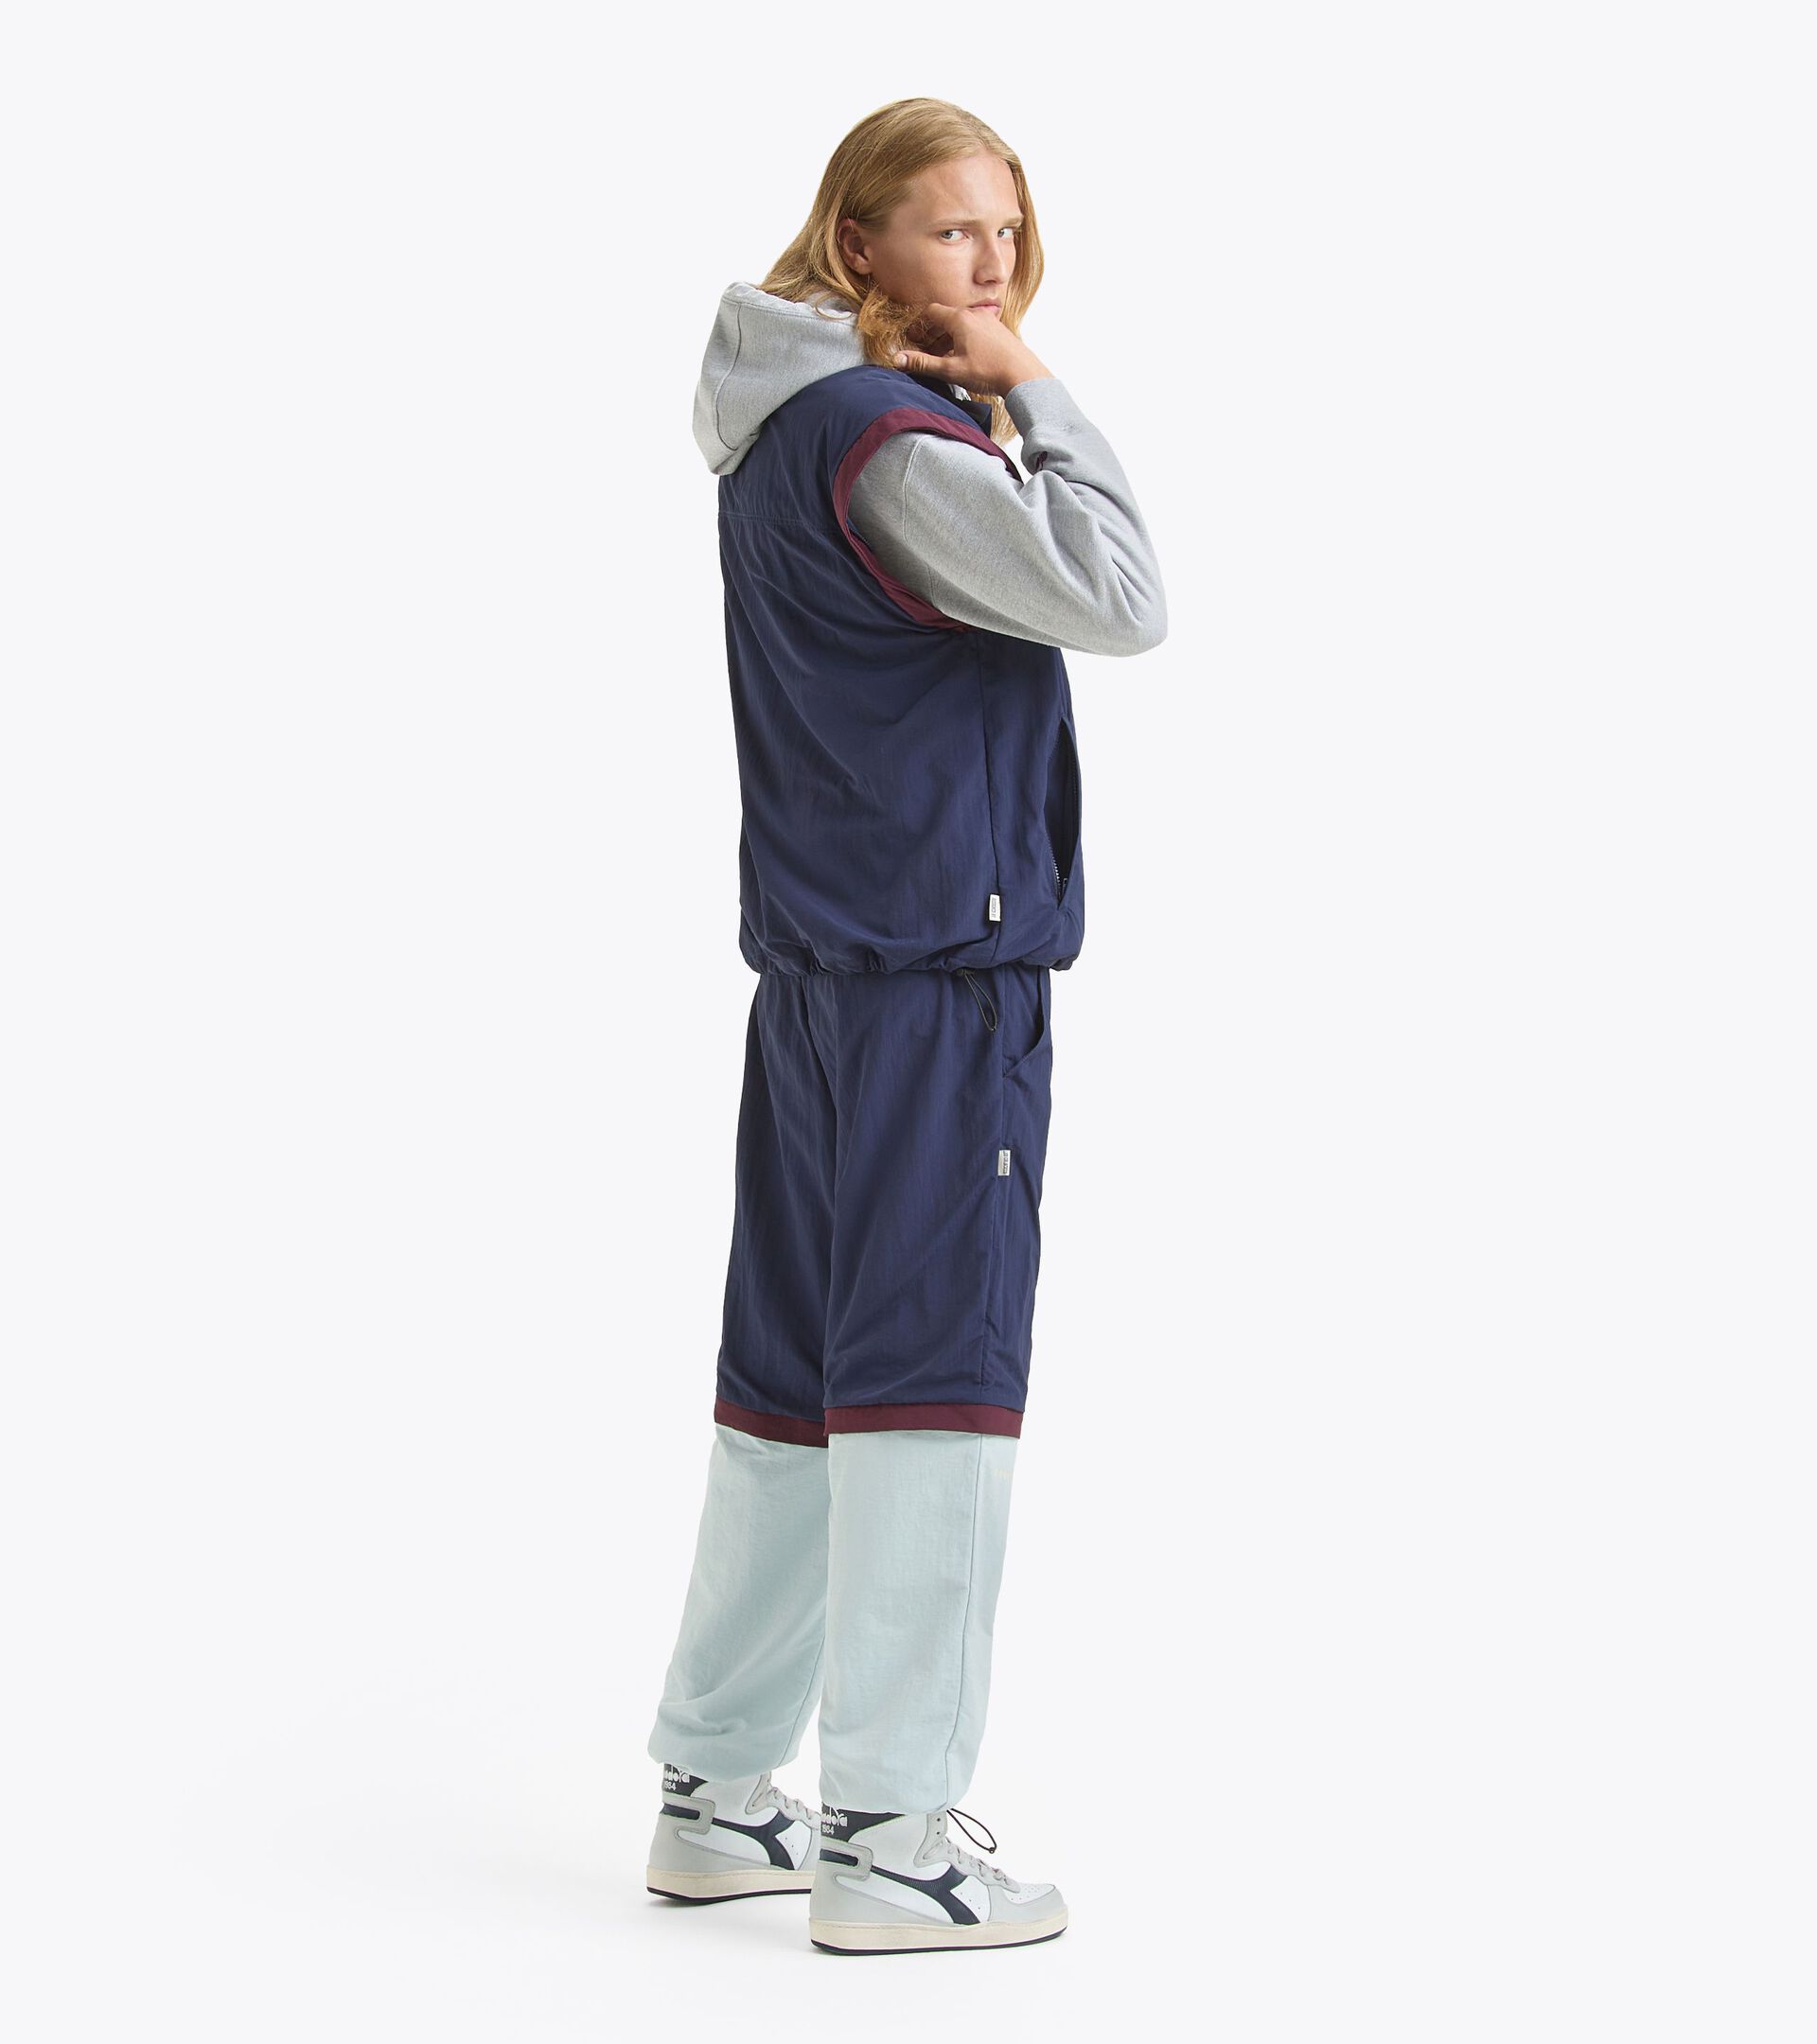 Modulare Hose - Made in Italy - Gender Neutral TRACK PANT LEGACY OCEANA/HOCHHAUS/WINDSOR WEIN - Diadora